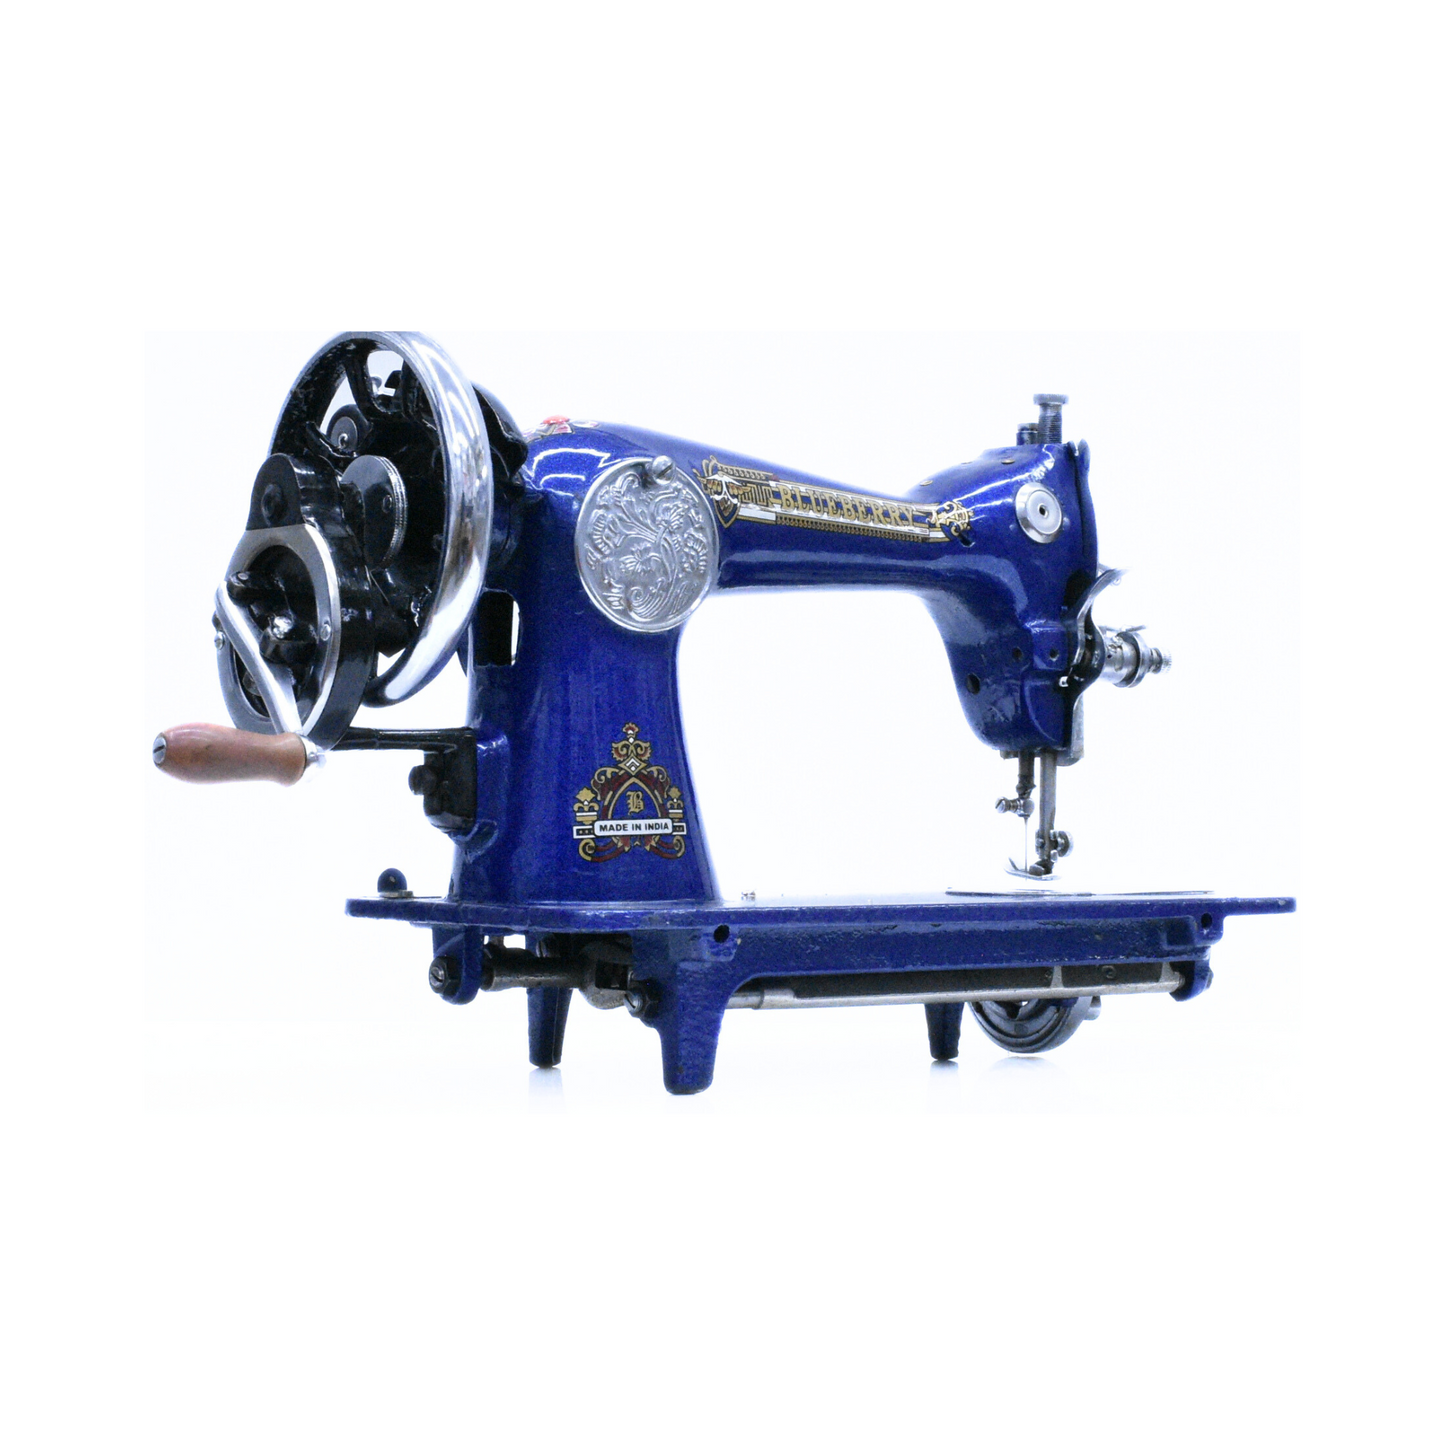 Blue berry - Vintage sewing machine - Blue - Side view